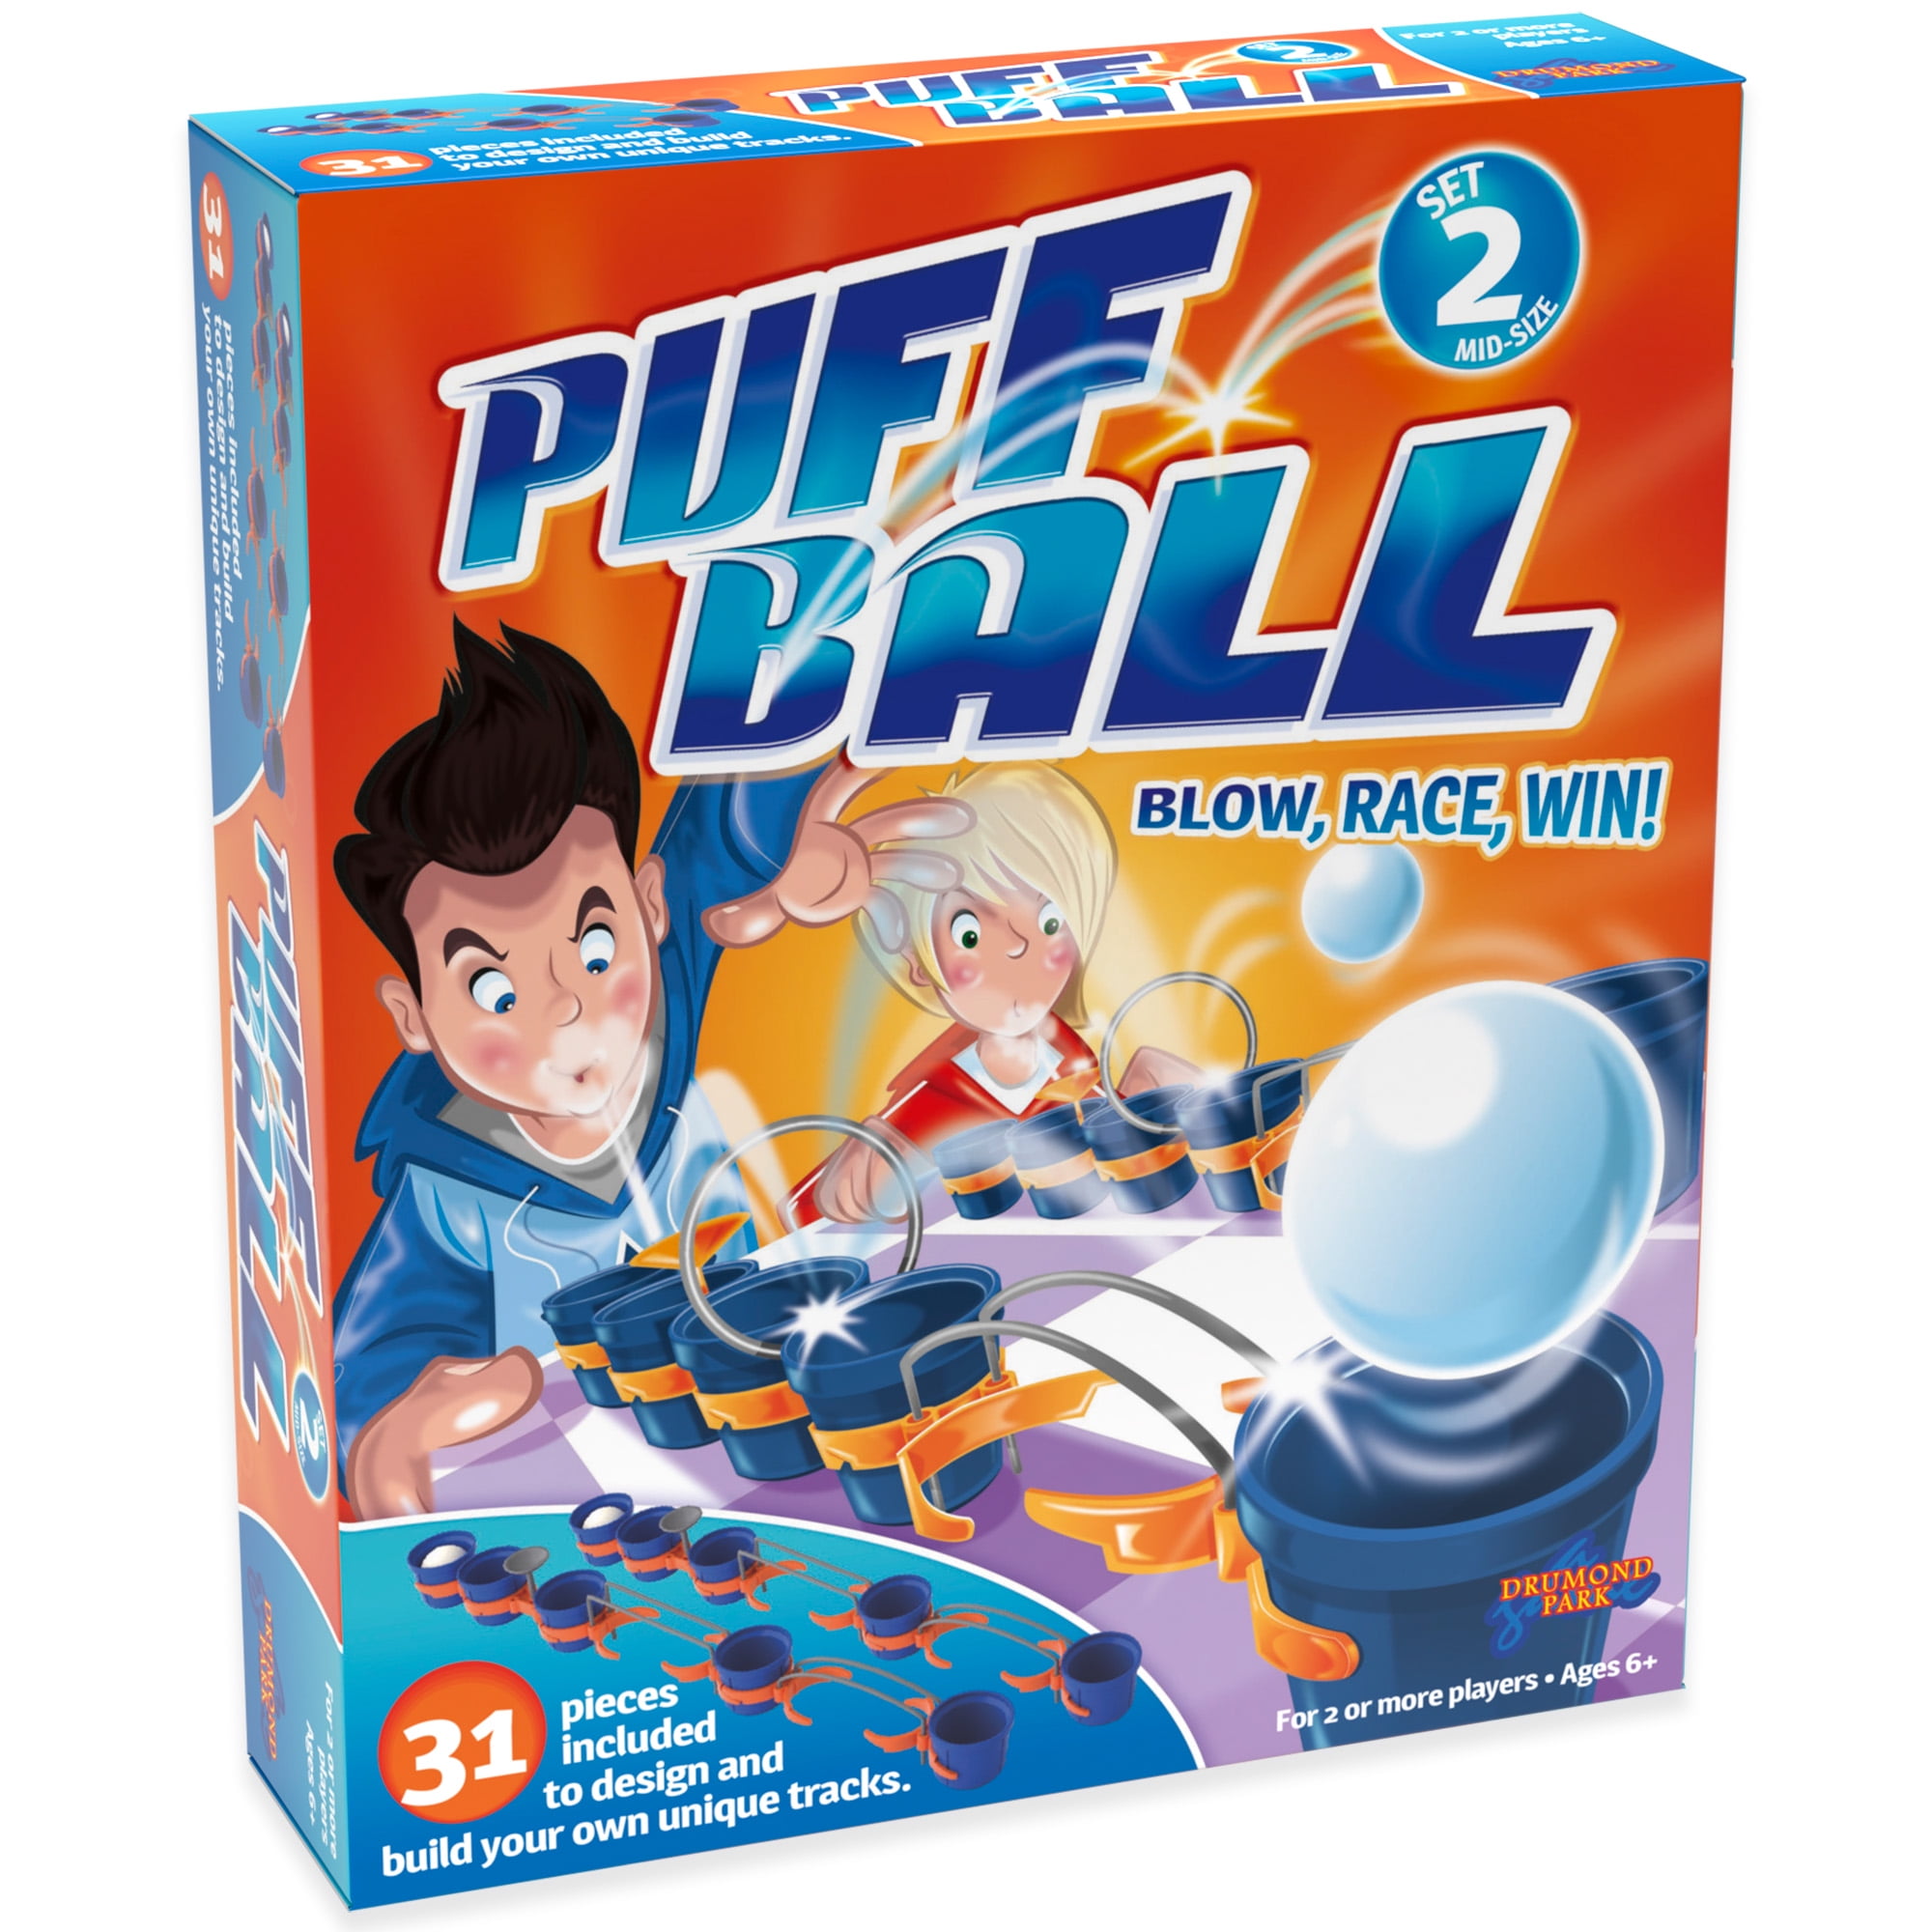 NEW OFFICIAL DRUMOND PARK PUFF BALL 3 FAMILY BOARD GAME PUFFBALL 